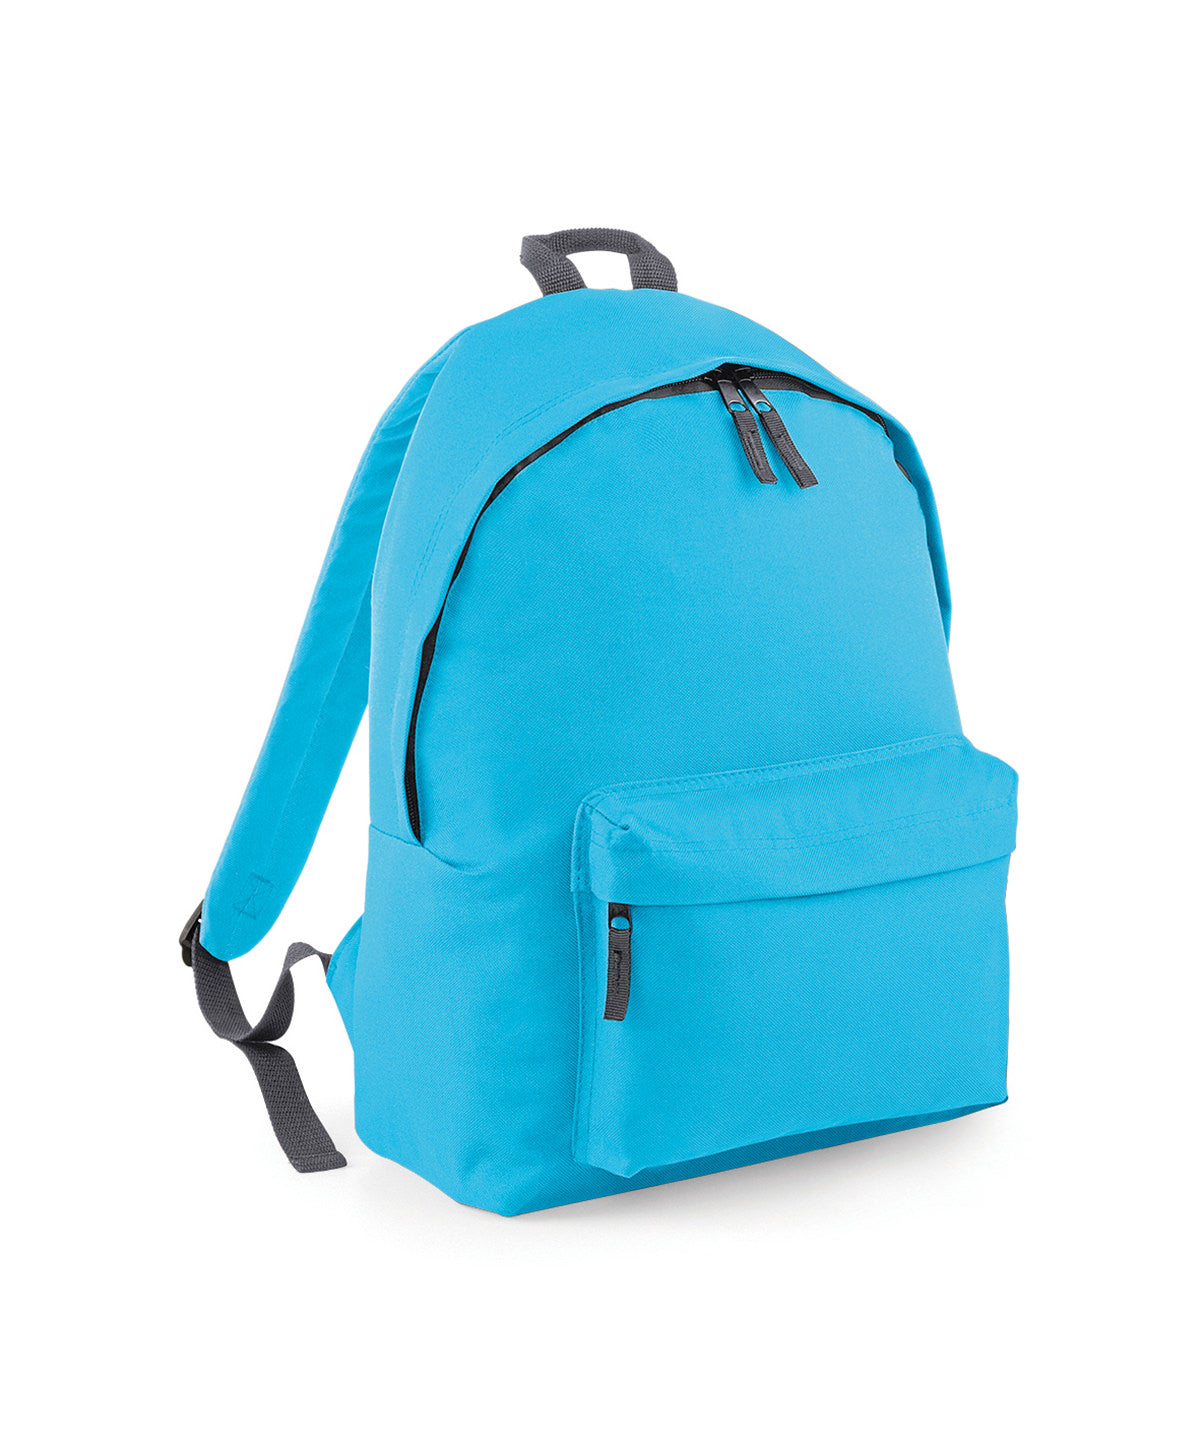 Personalised Bags - Turquoise Bagbase Original fashion backpack